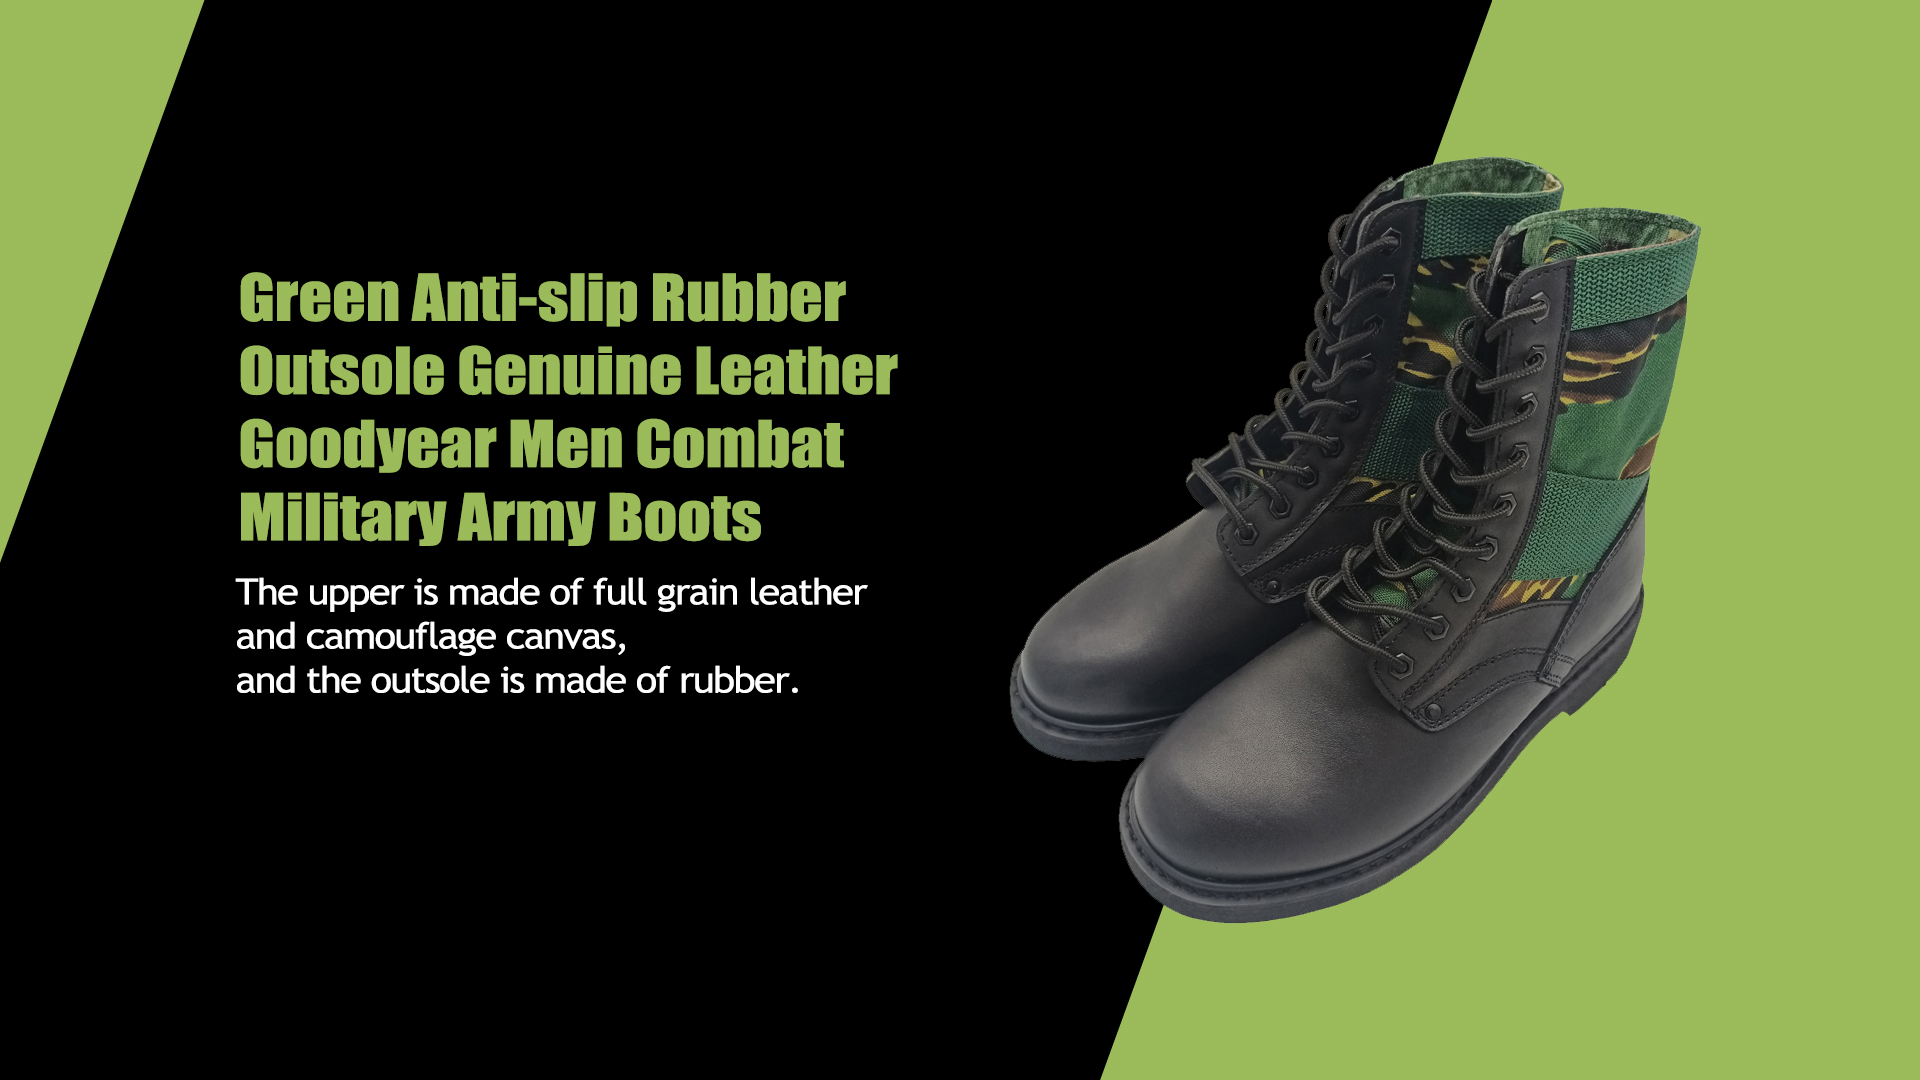 Green Anti-slip Rubber Outsole Genuine Leather Goodyear Men Combat Military Army Boots